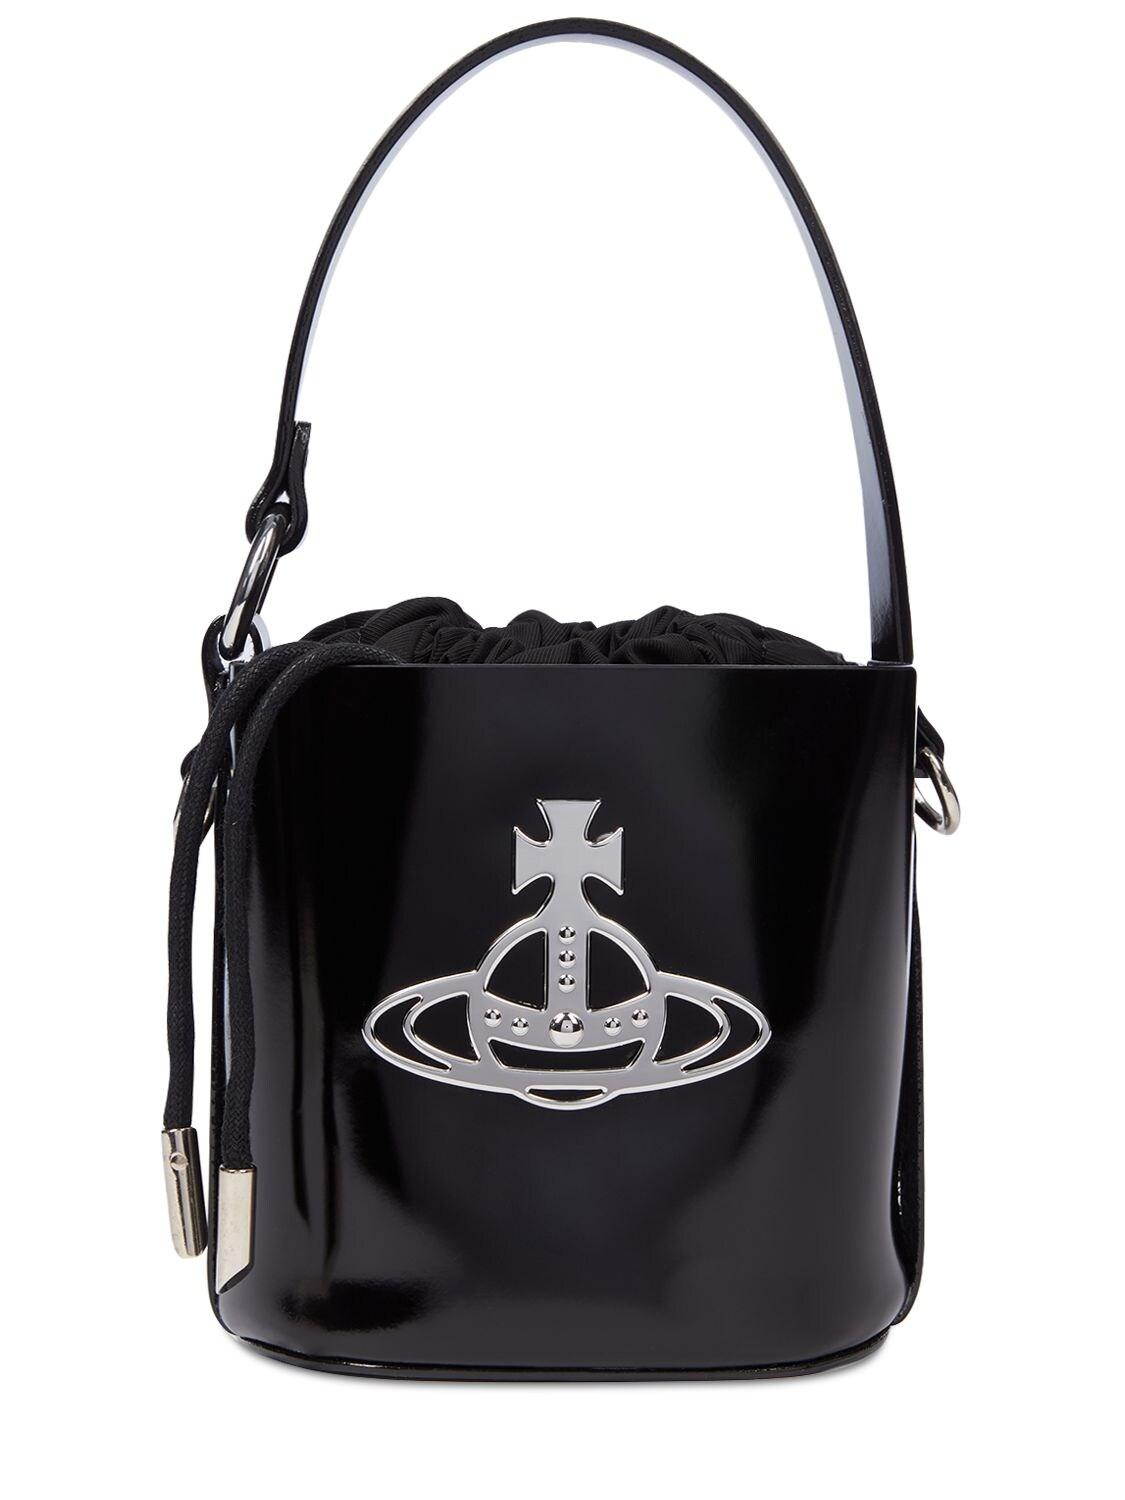 Vivienne Westwood Small Daisy Patent Leather Bucket Bag in Black 